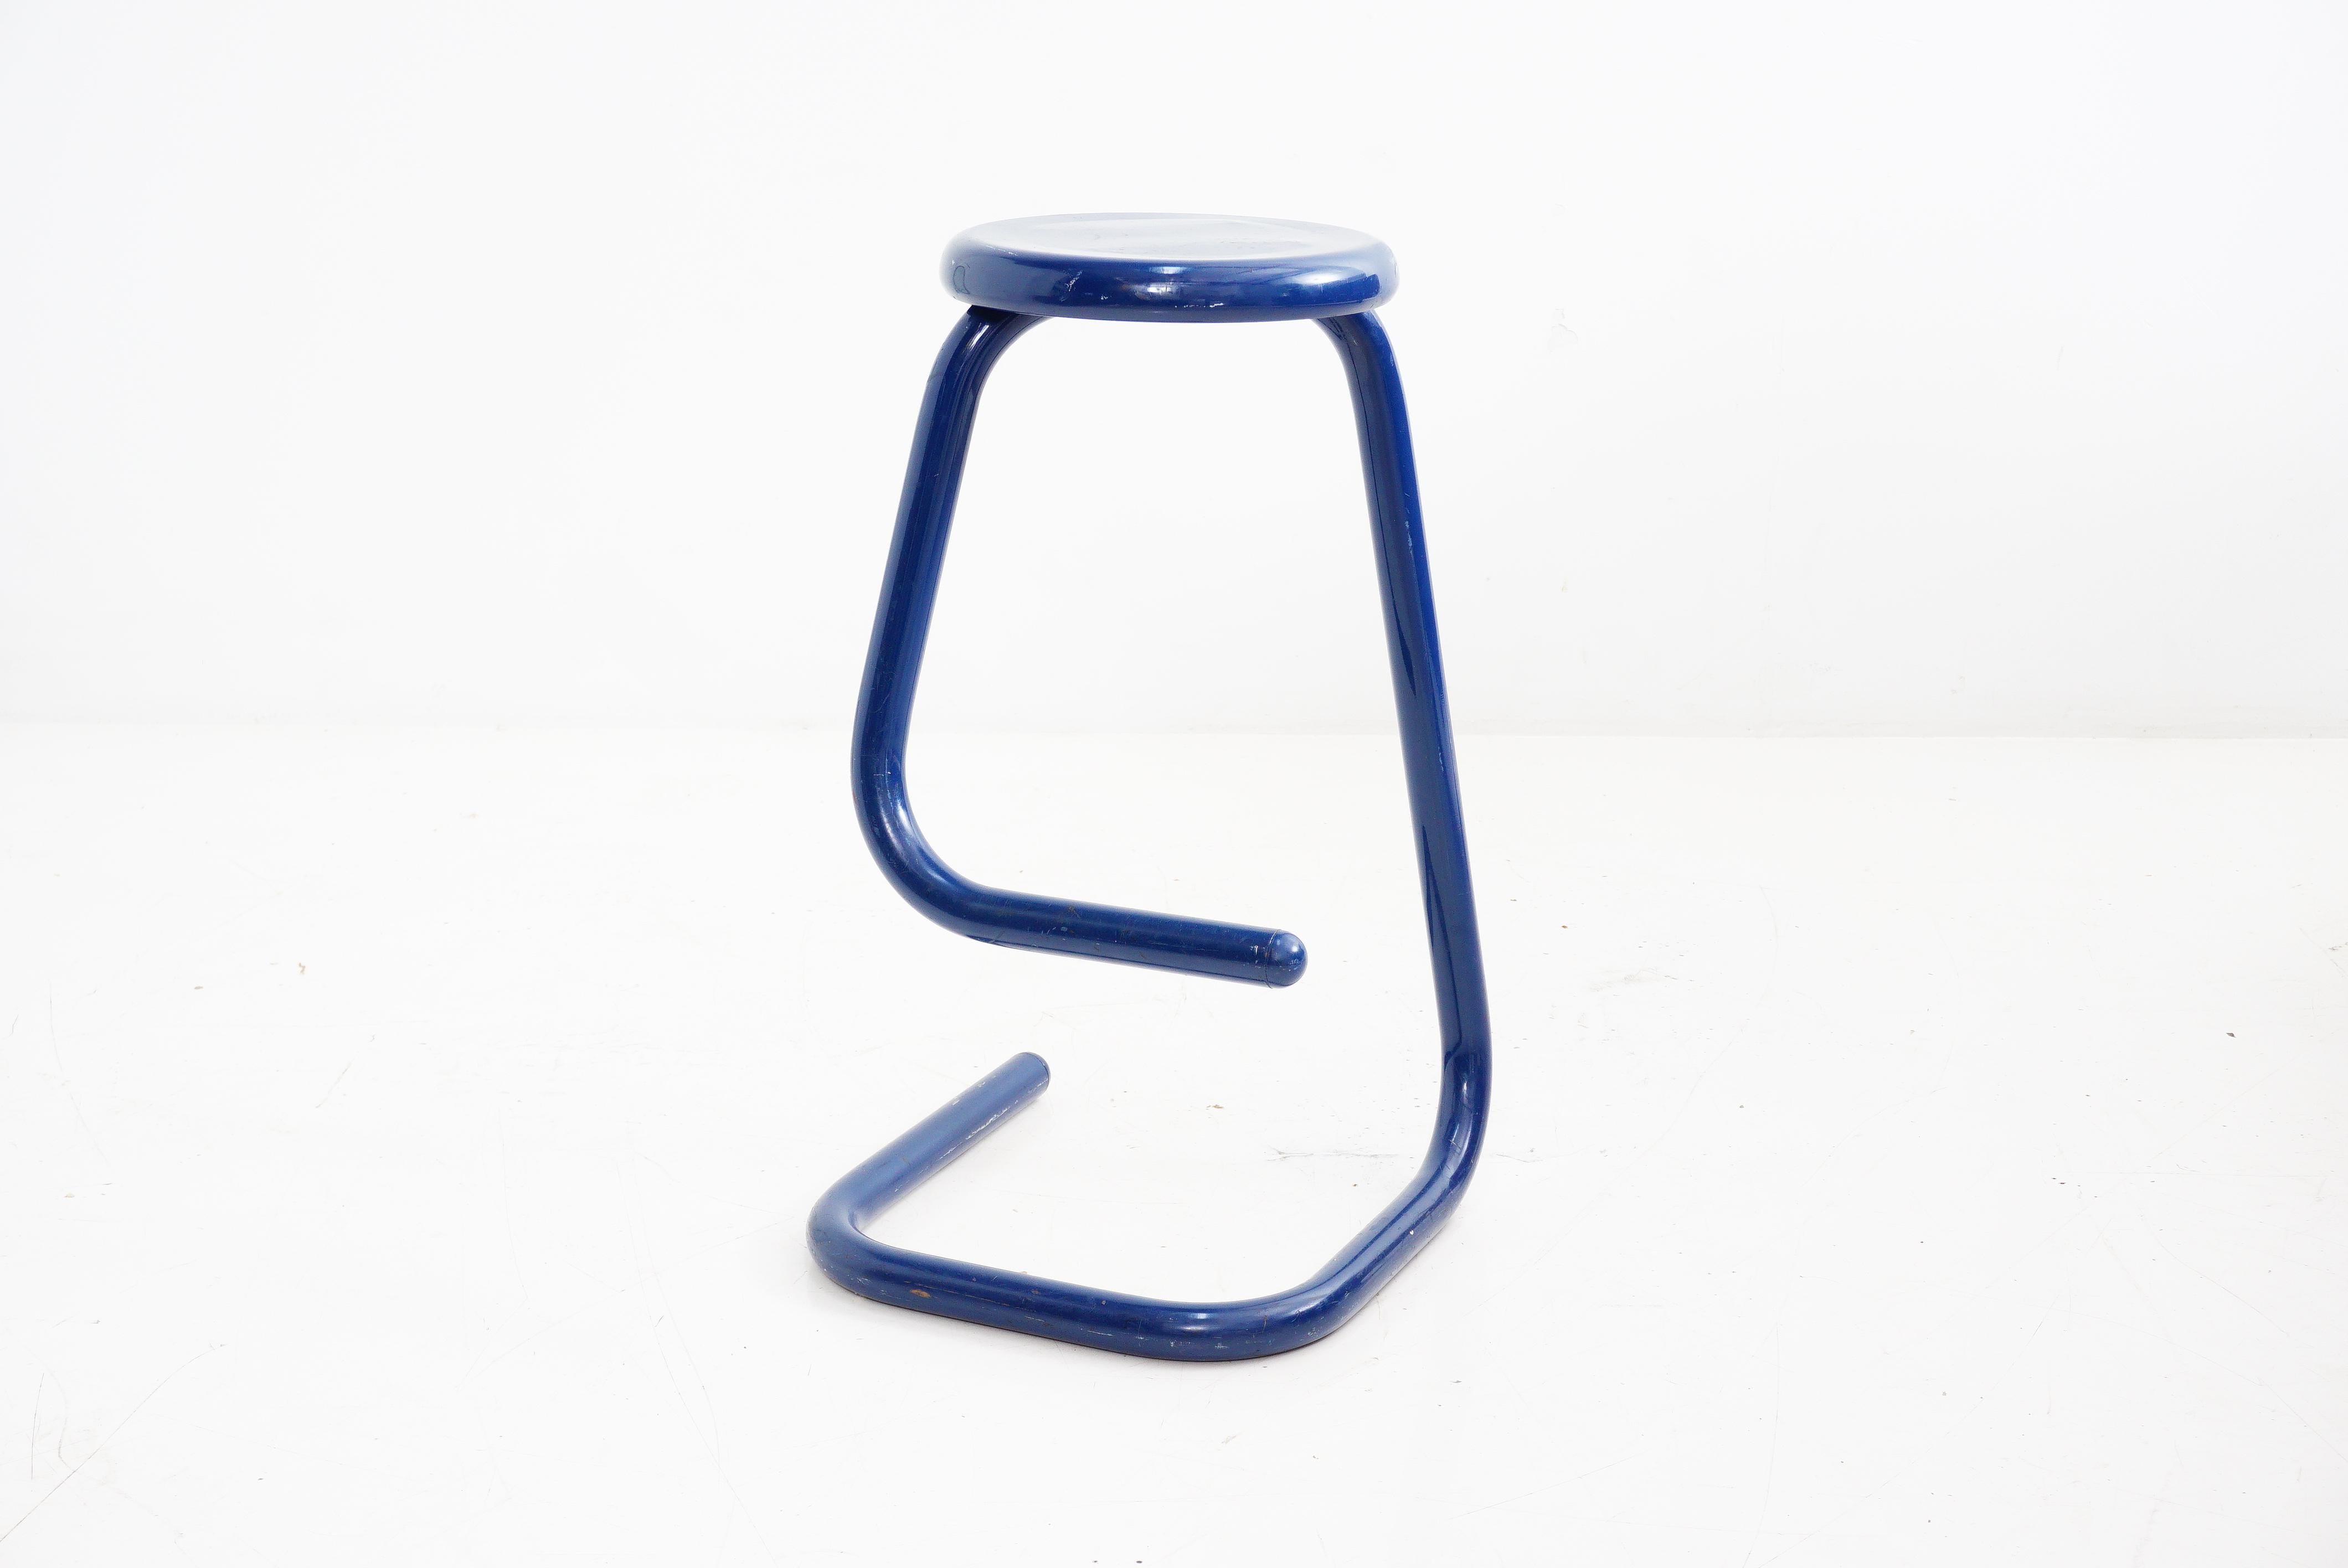 Elevate your seating game with our dark blue bar stool that's basically a paperclip showing off its gym gains. Who knew office supplies could be so stylish? Pull up a conversation starter and toast to design that's bending all the rules.

- 28